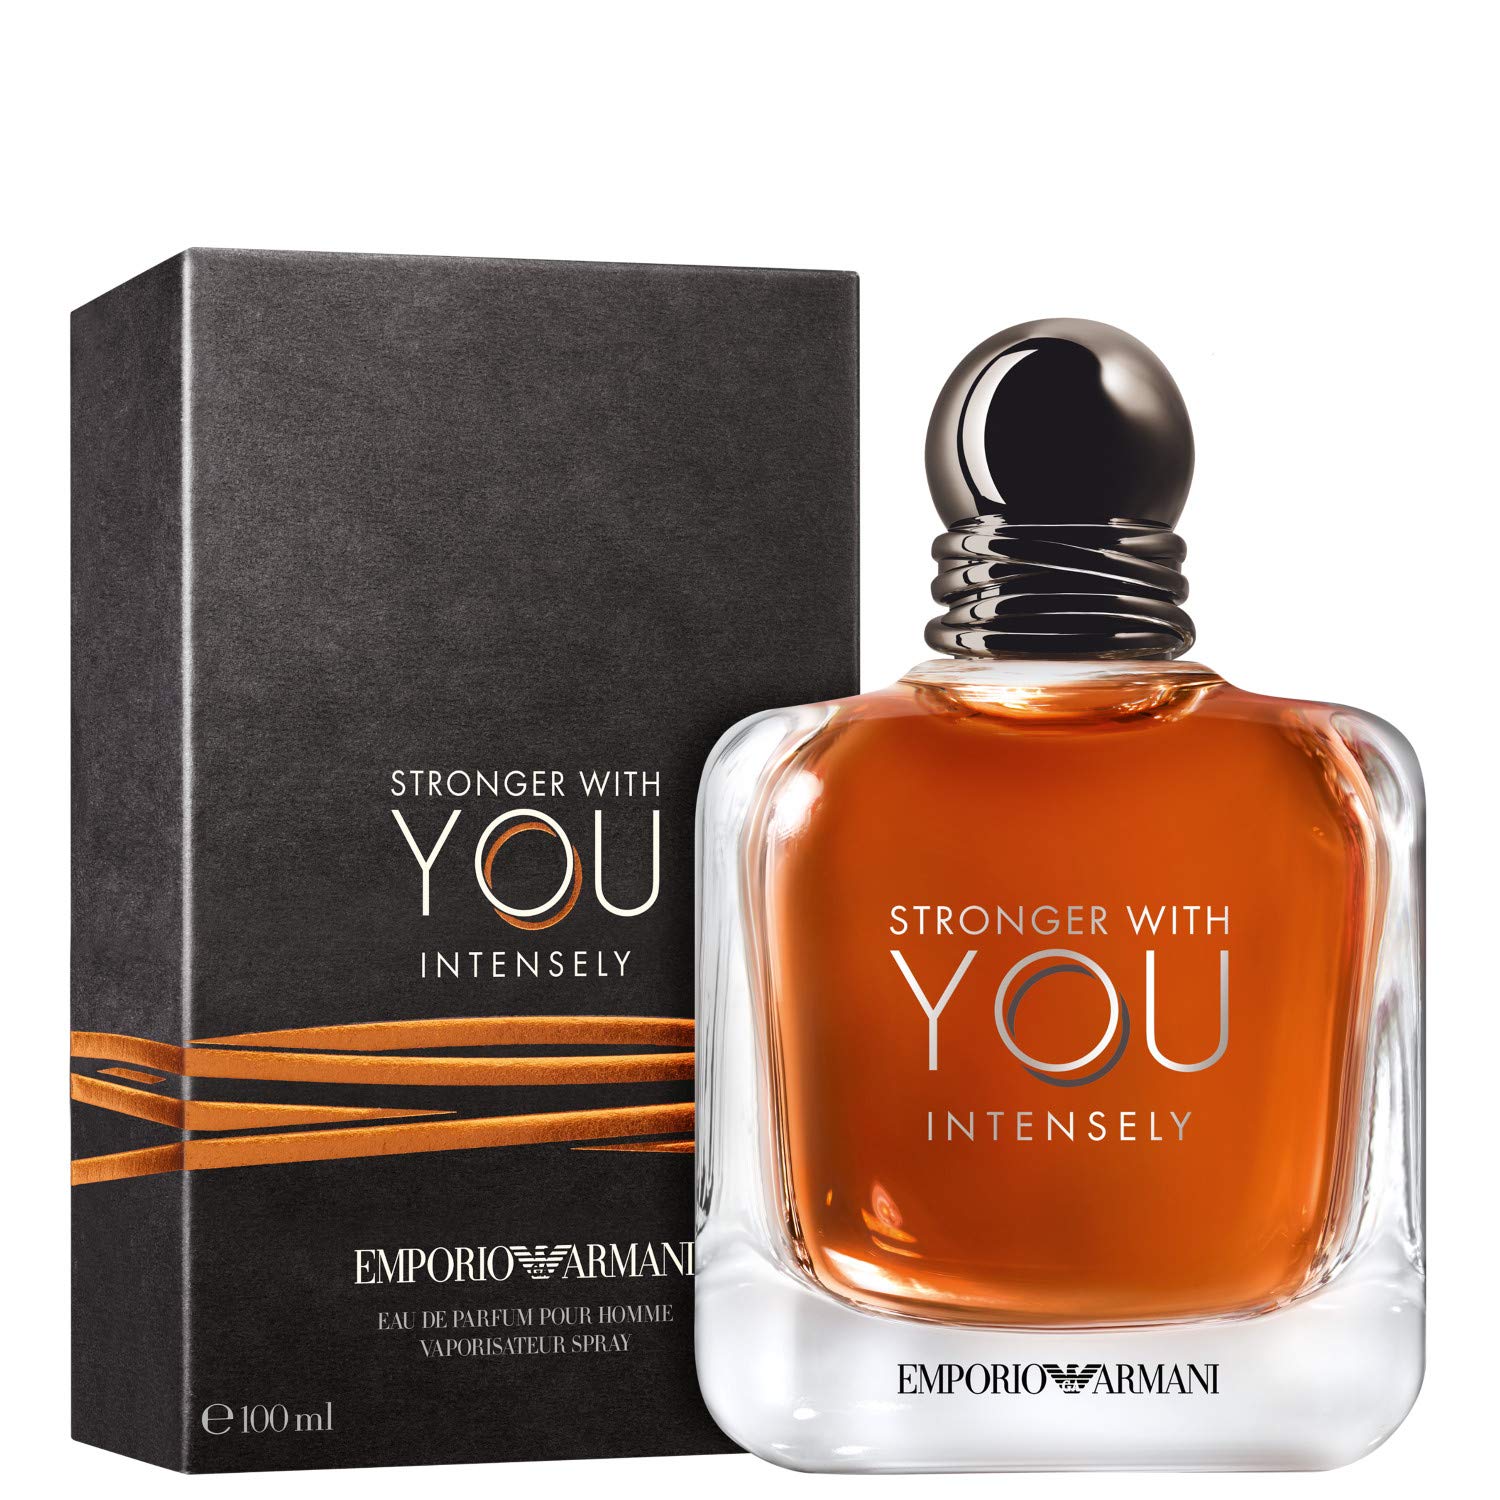 Giorgio Armani - Stronger With You Intensely  edp M